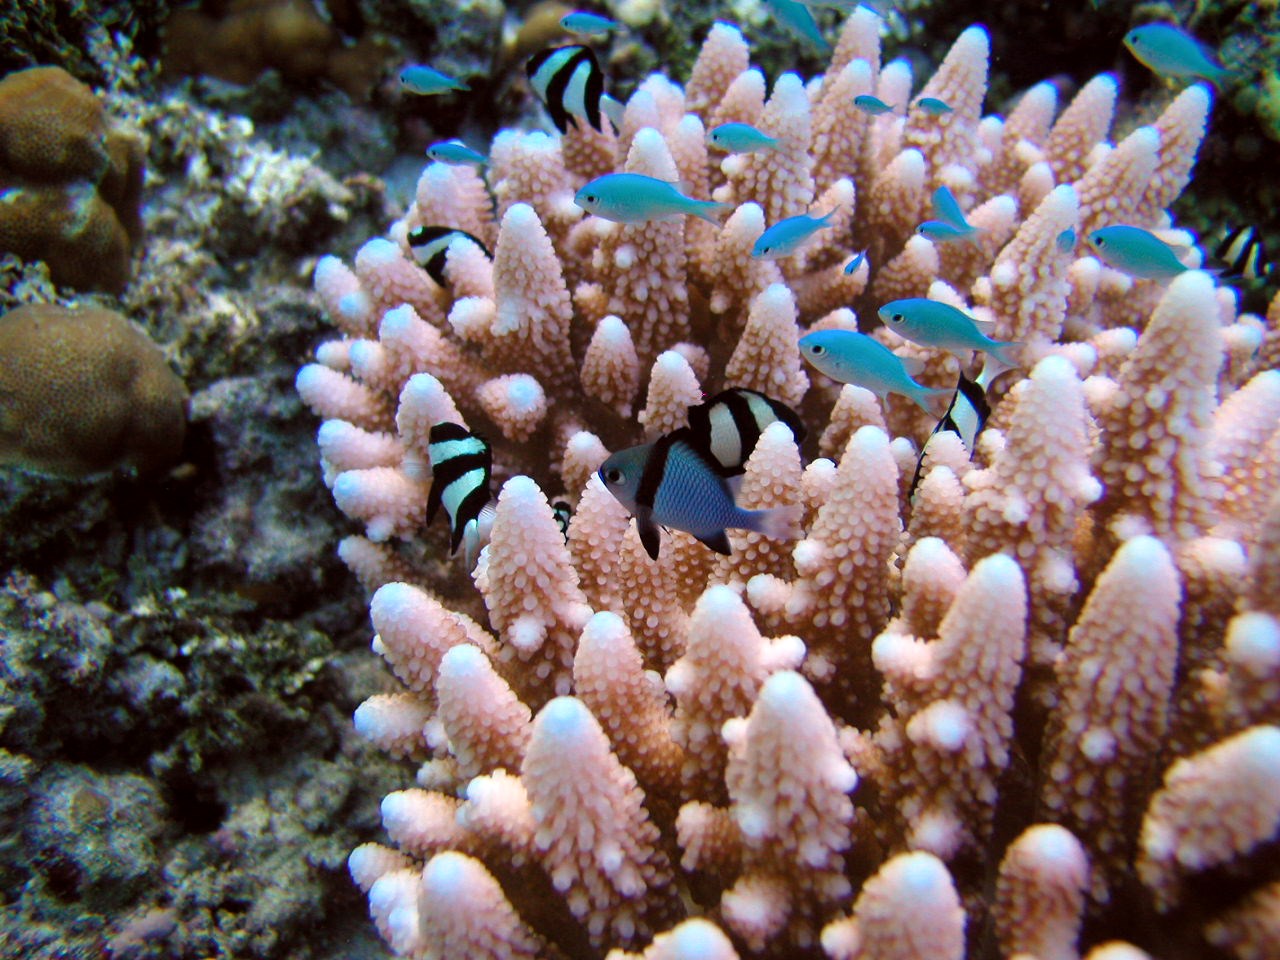 Coral and fishes